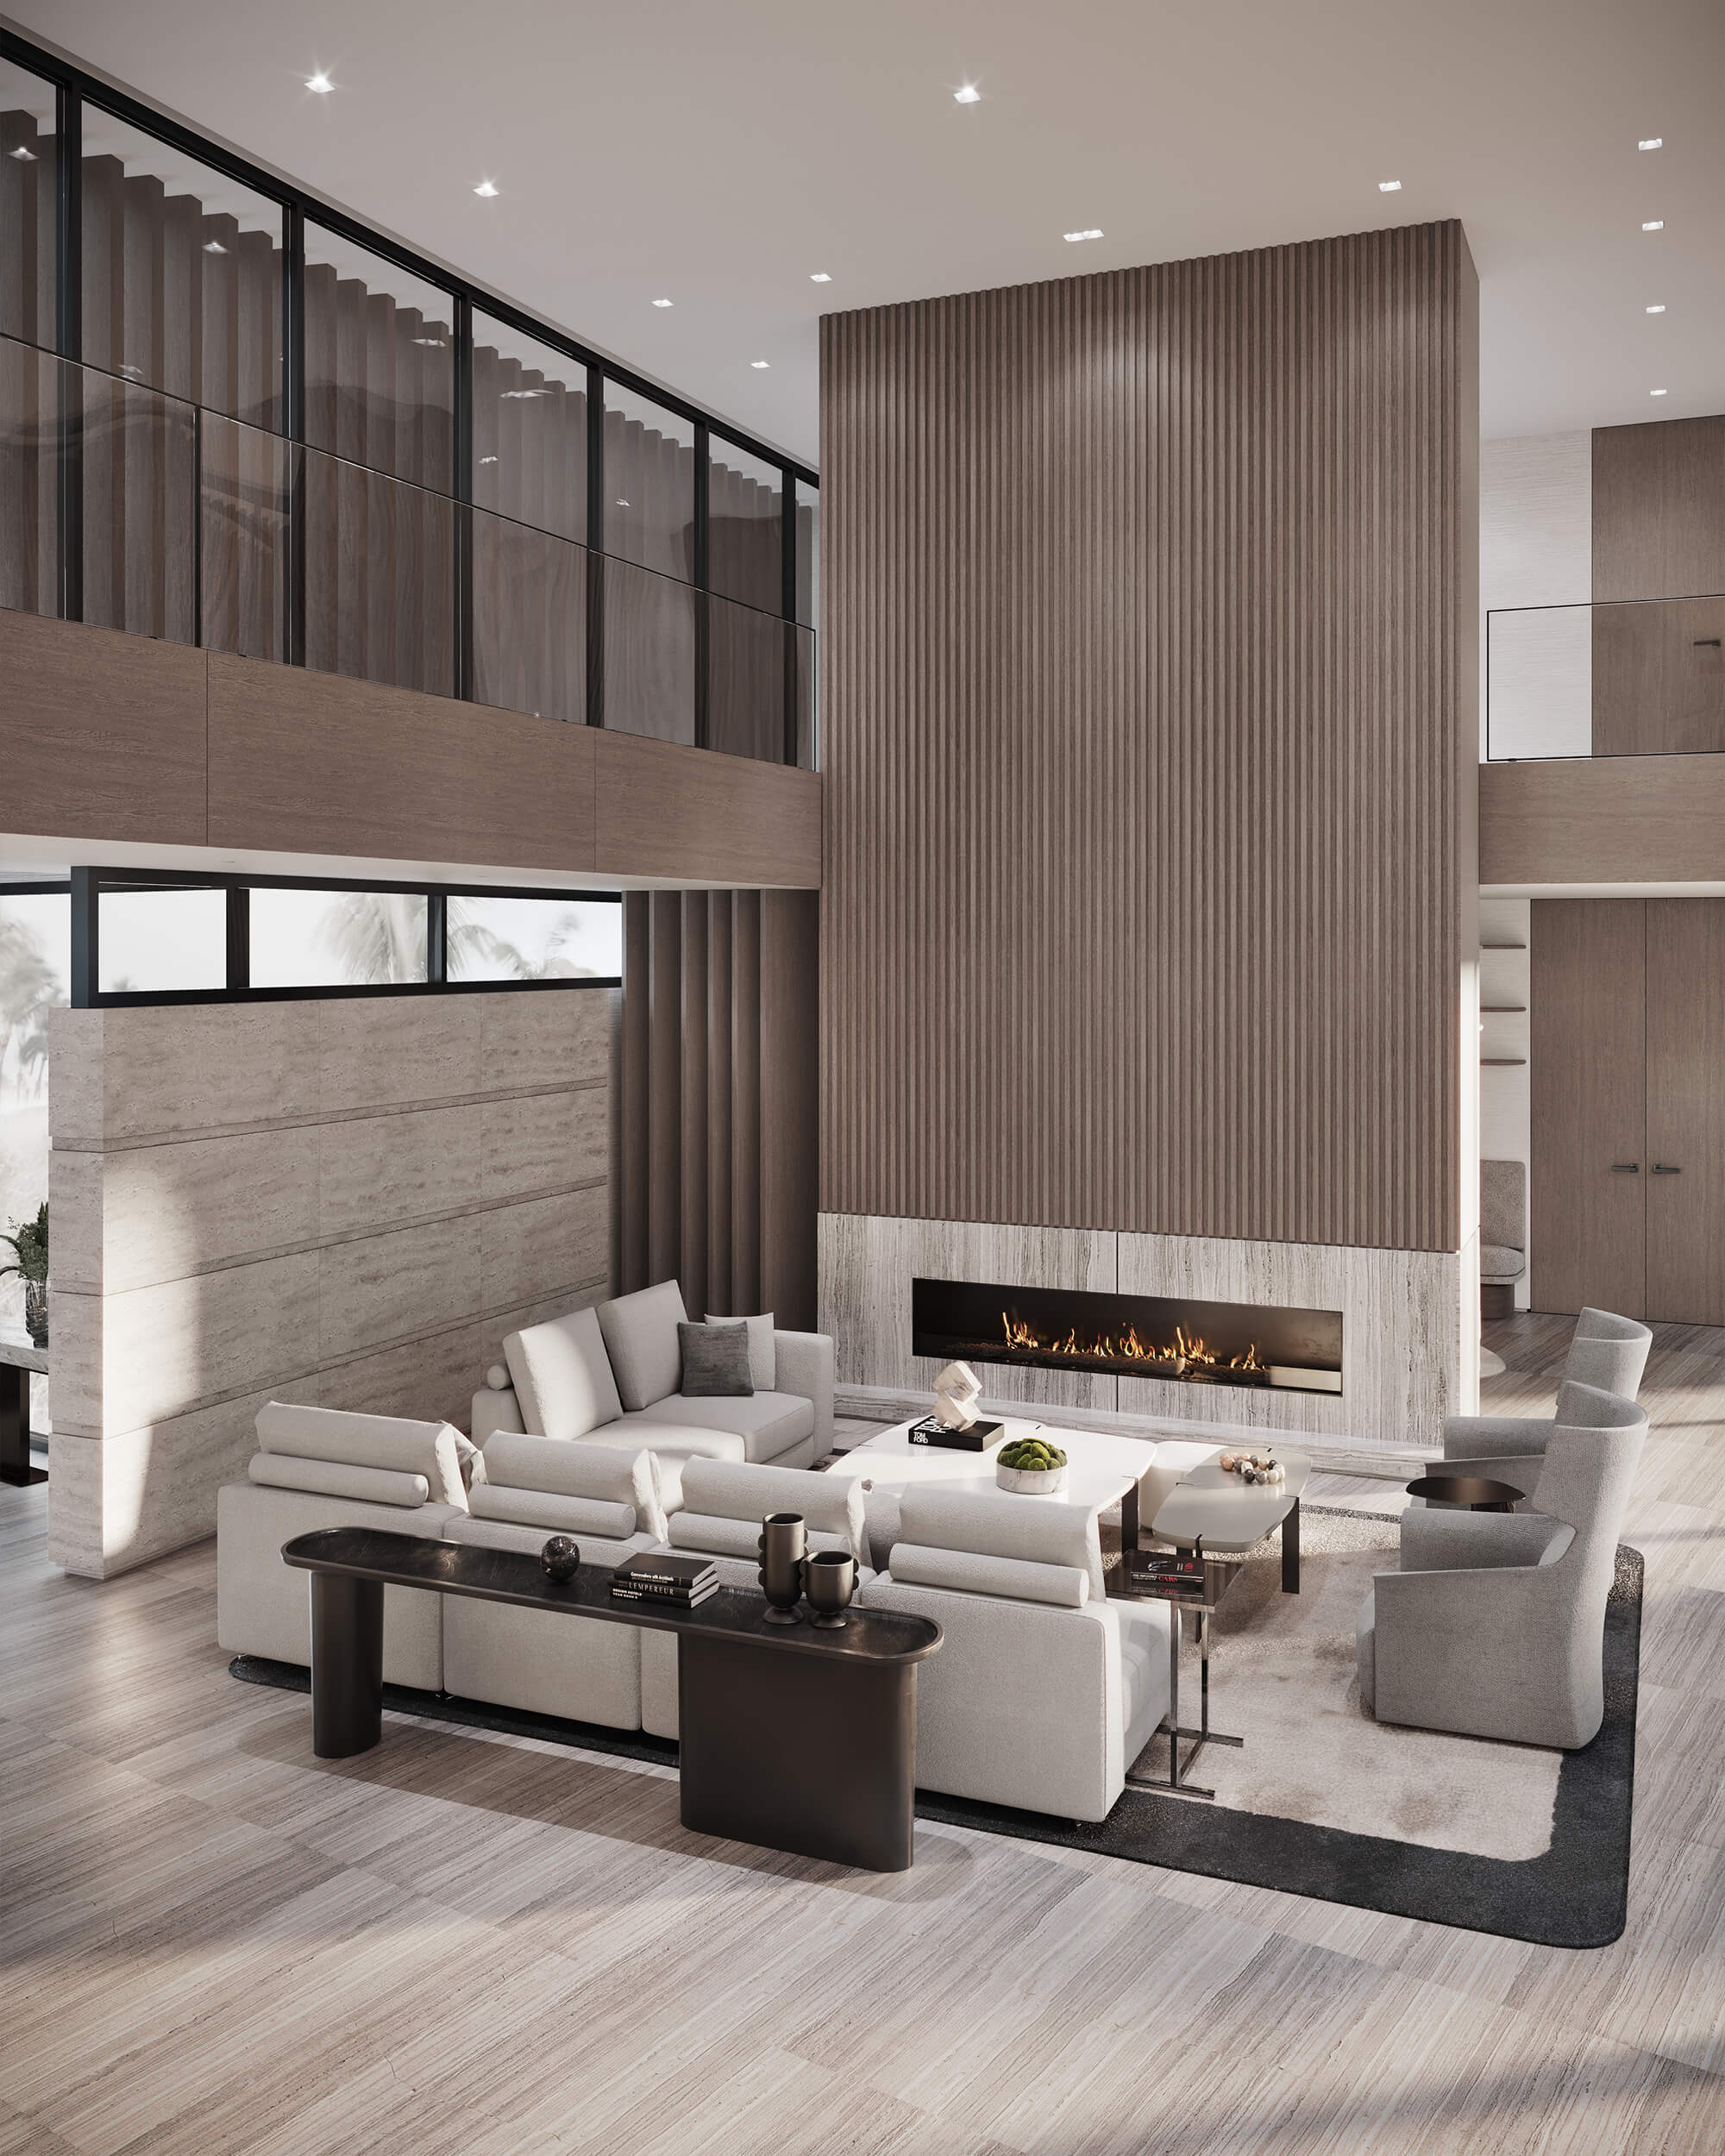 LIGHTHOUSE: New-Construction Residence Designed for Multi-Generational Use: Living Room